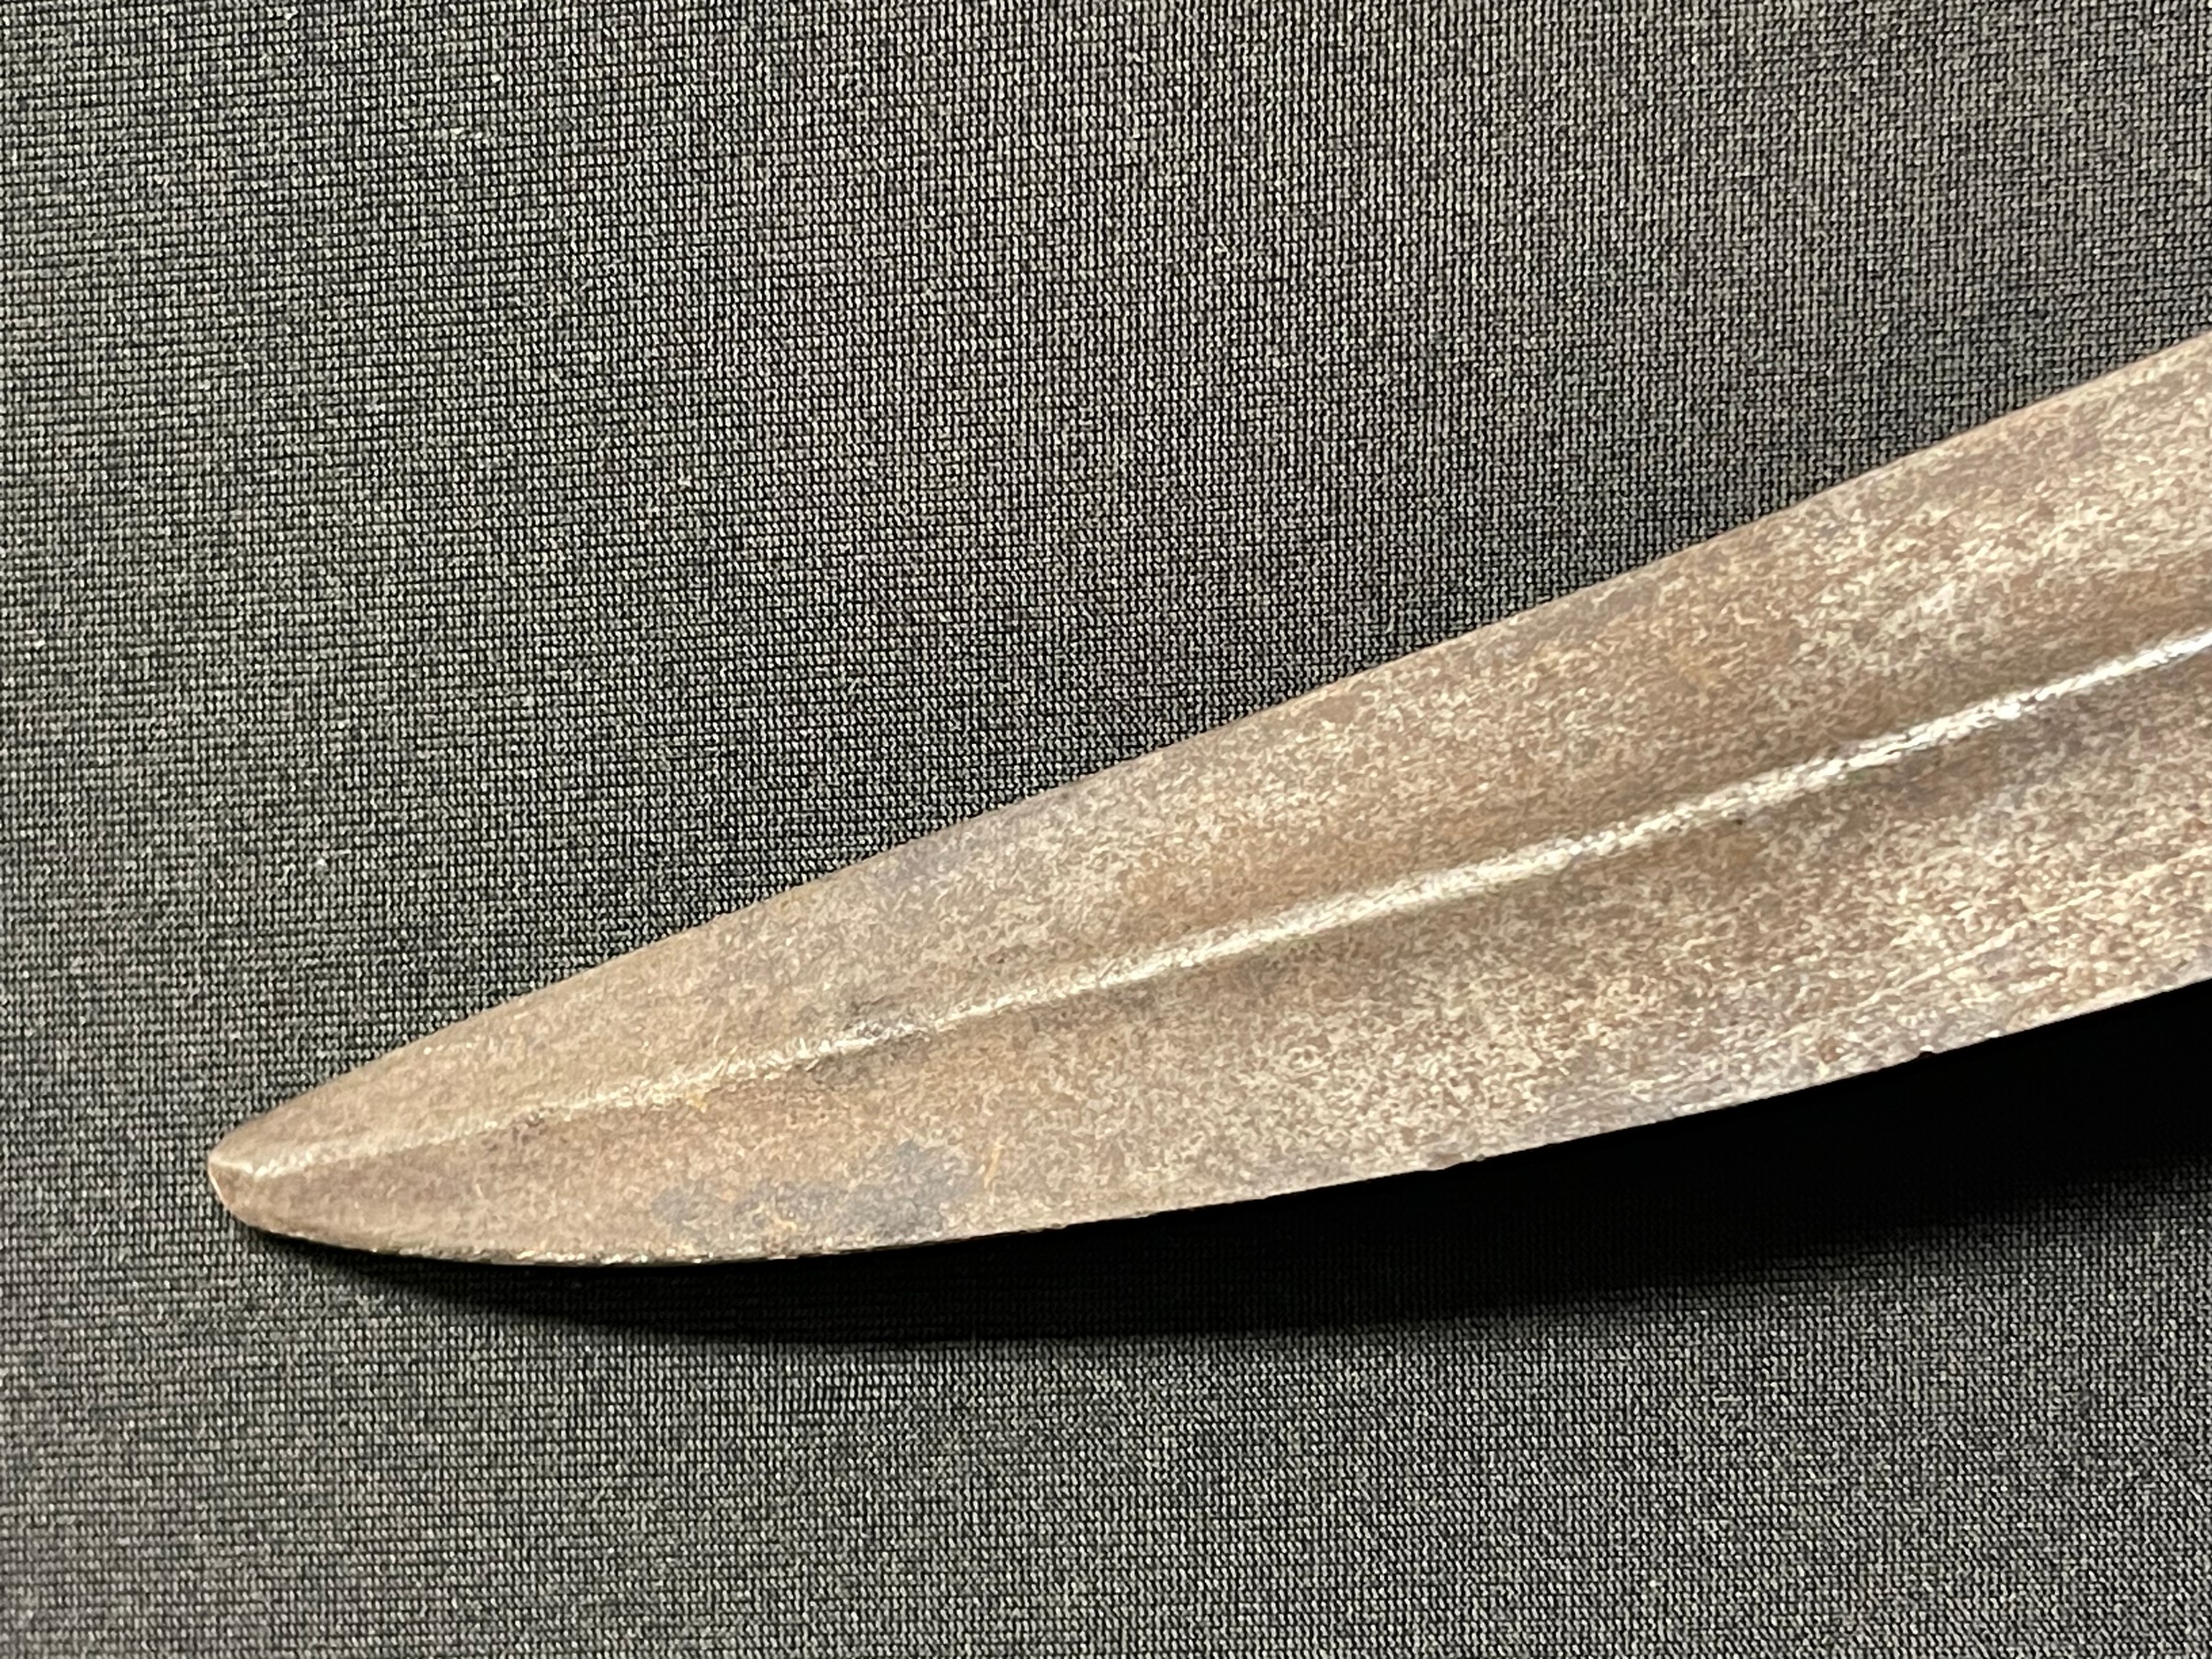 A Middle Eastern kindjal dagger, 24cm curved blade with central ridge, horn handle, 39cm long - Image 13 of 17